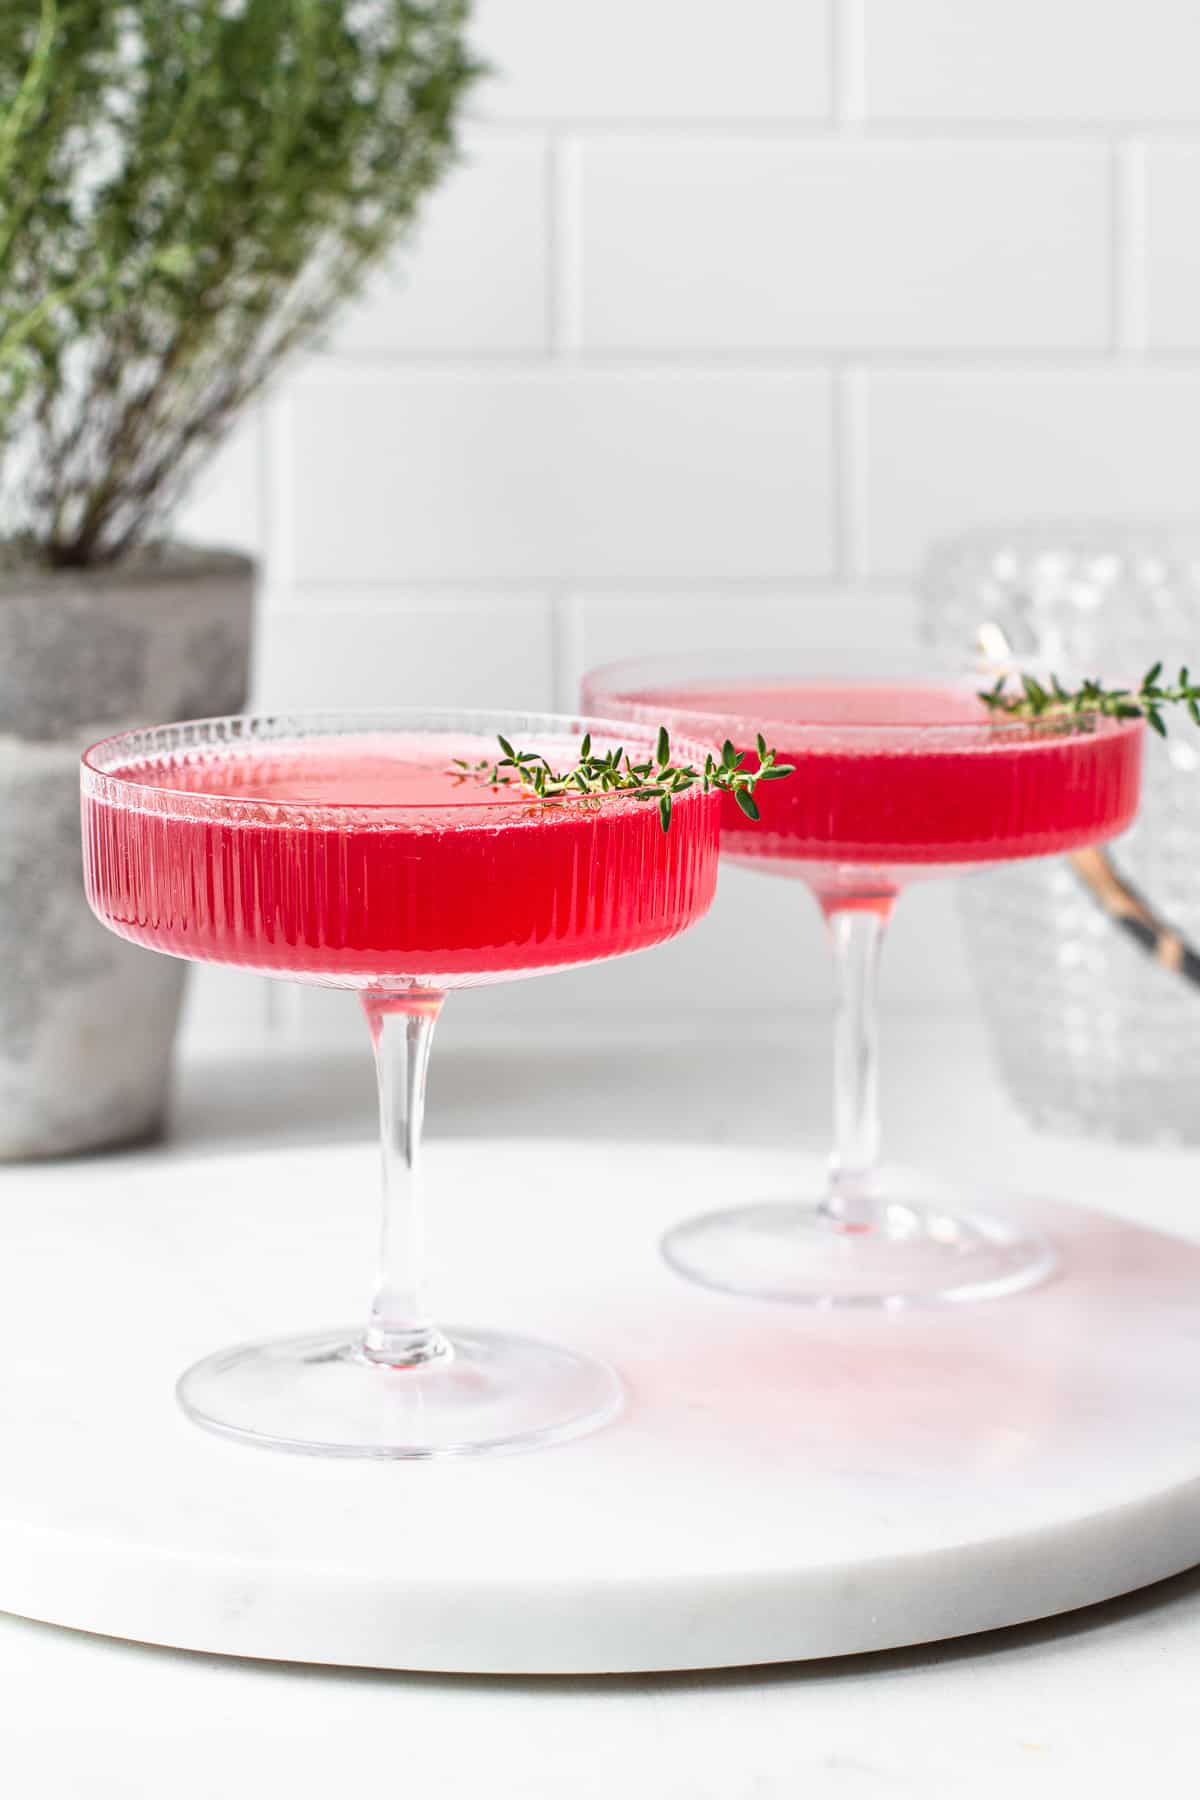 Pink cocktail in a champagne coupe glass in front of a white tile background.